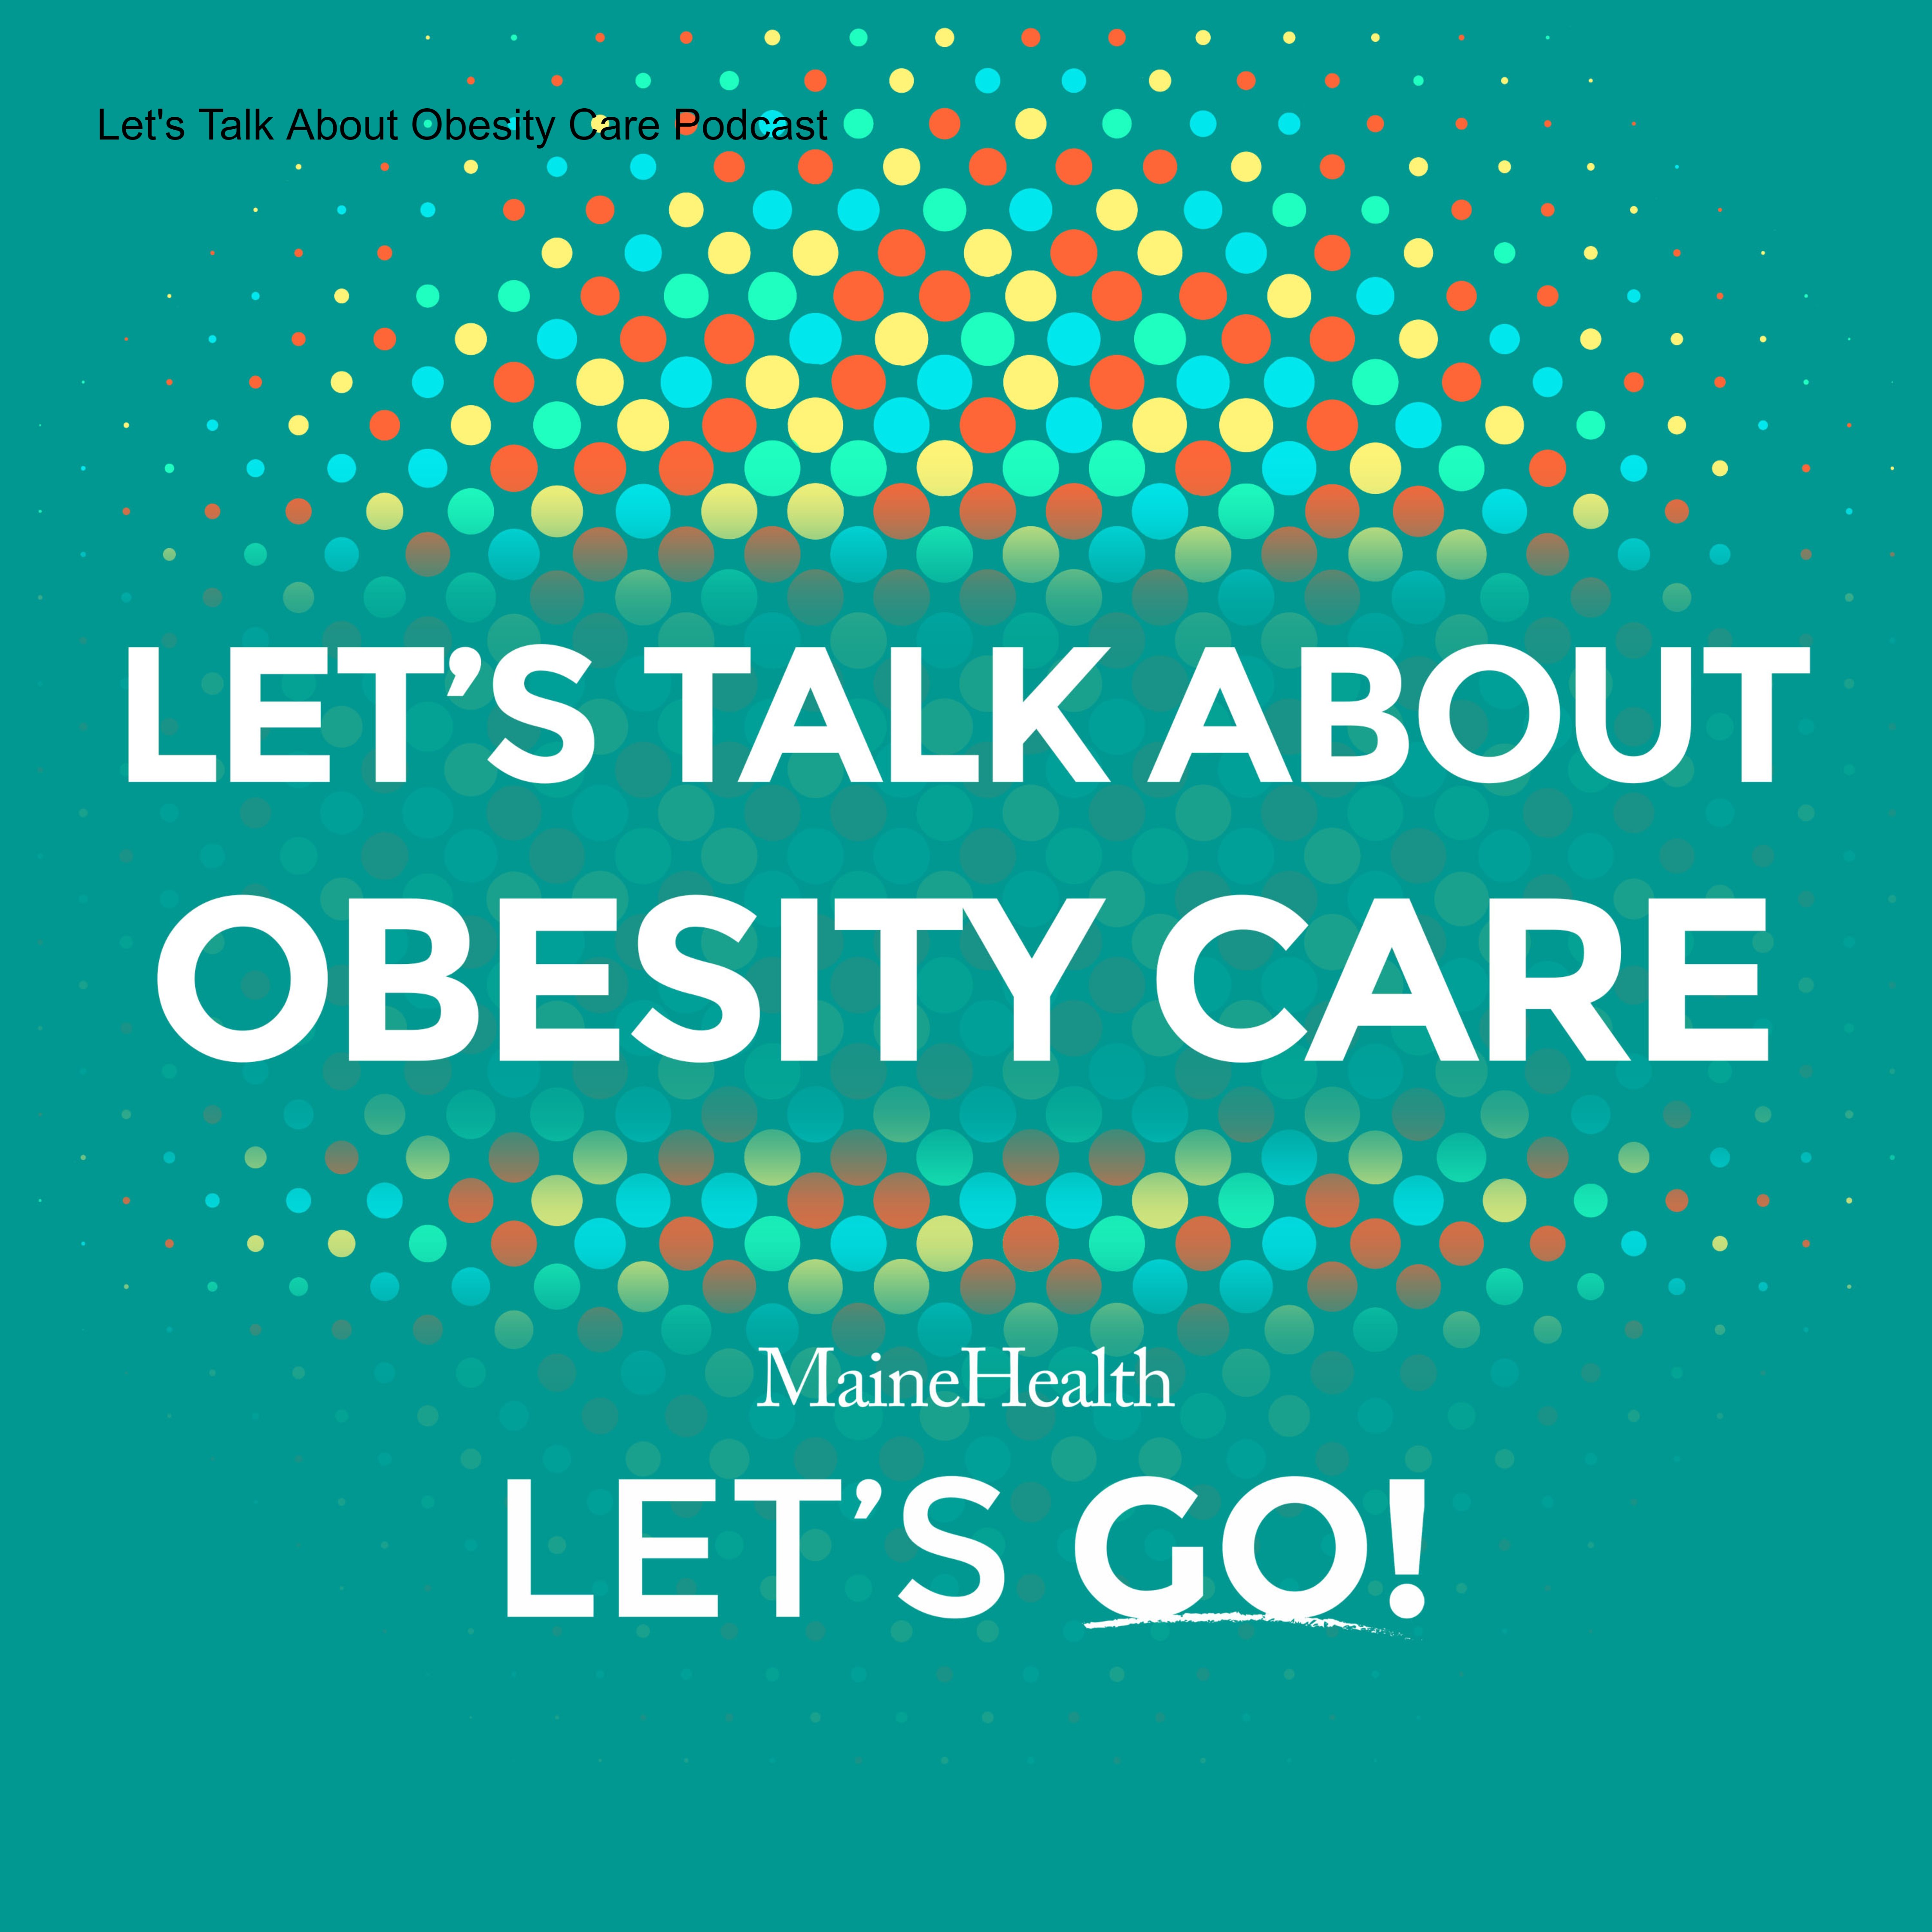 Let‘s Talk About Obesity Care